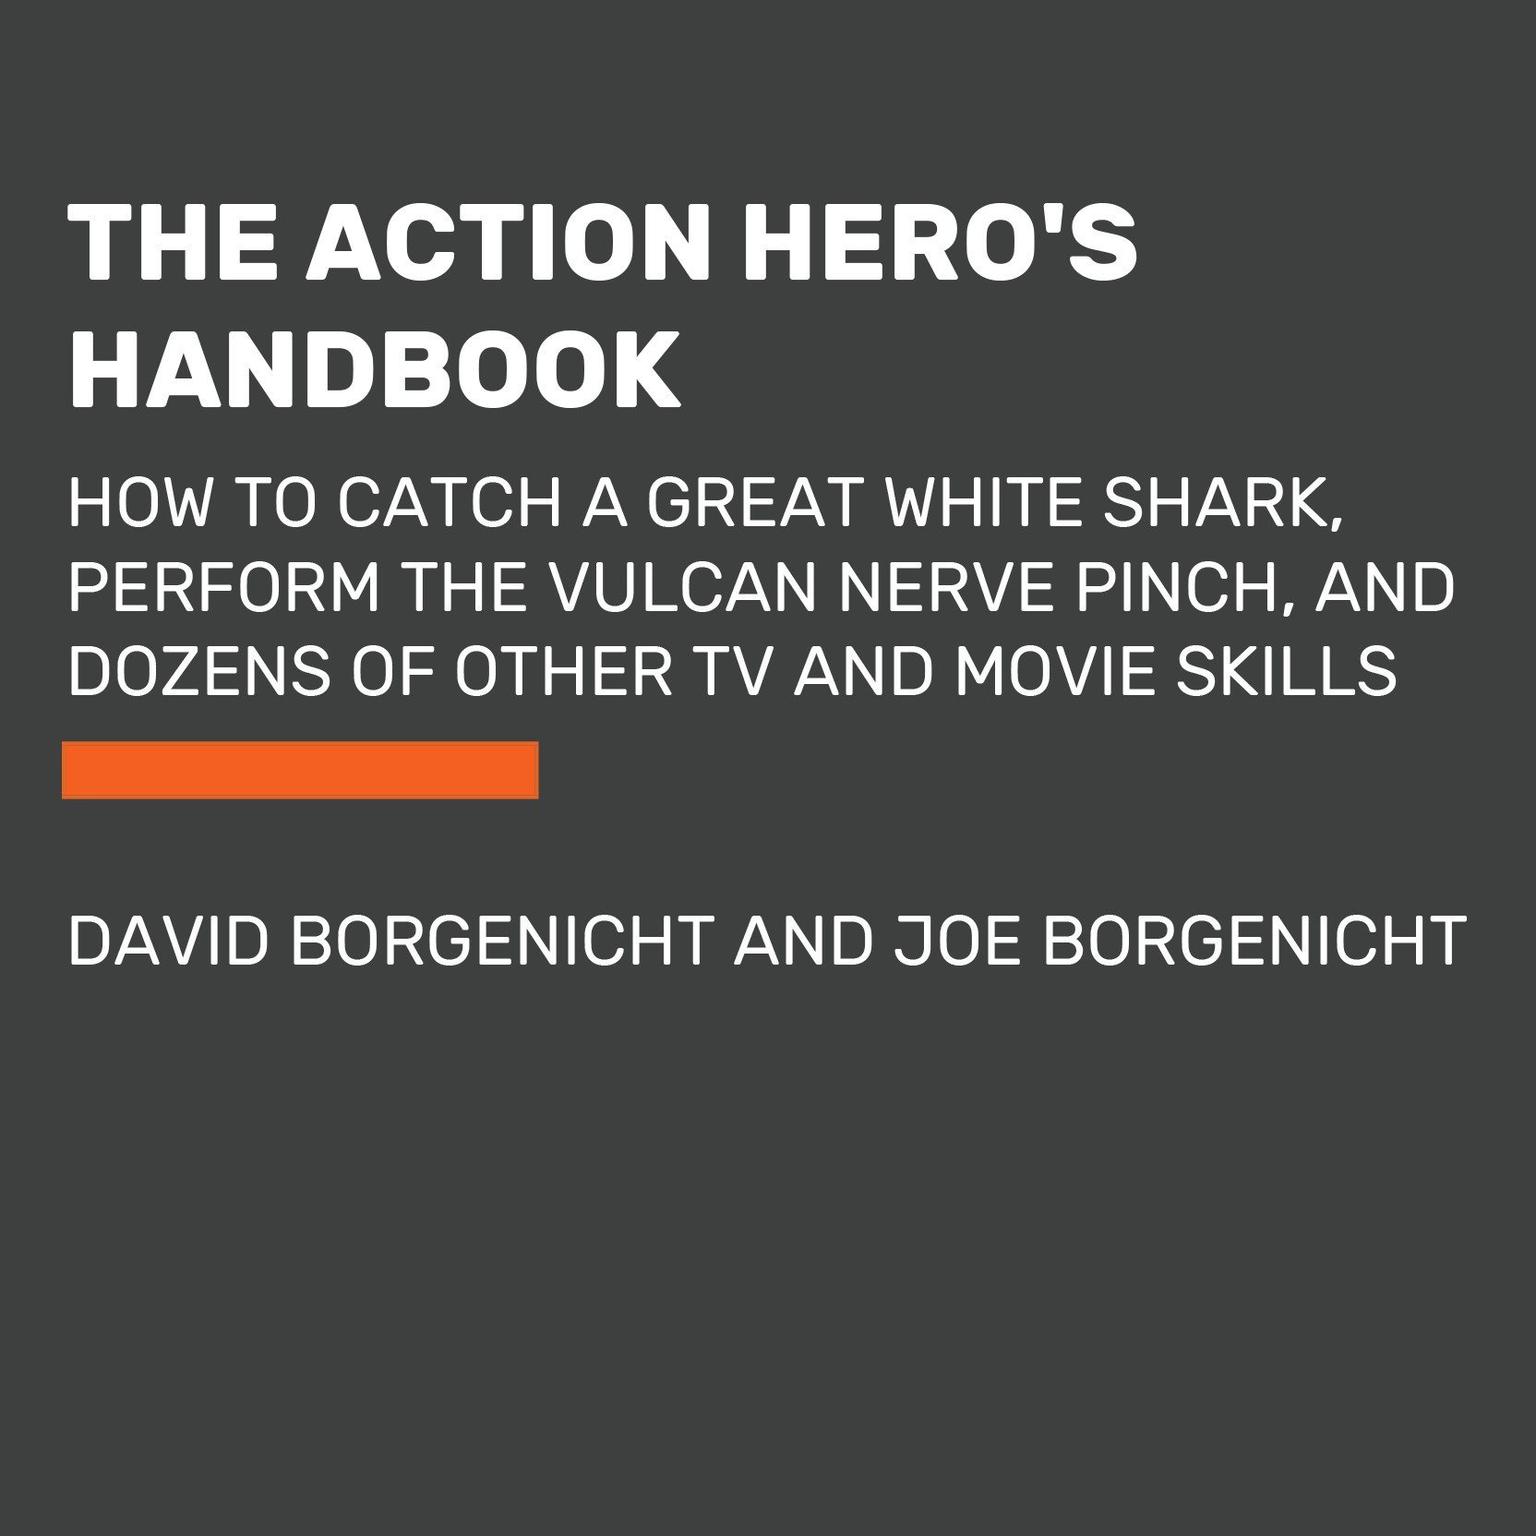 The Action Heros Handbook: How to Catch a Great White Shark, Perform the Vulcan Nerve Pinch, and Dozens of Other TV and Movie Skills Audiobook, by David Borgenicht